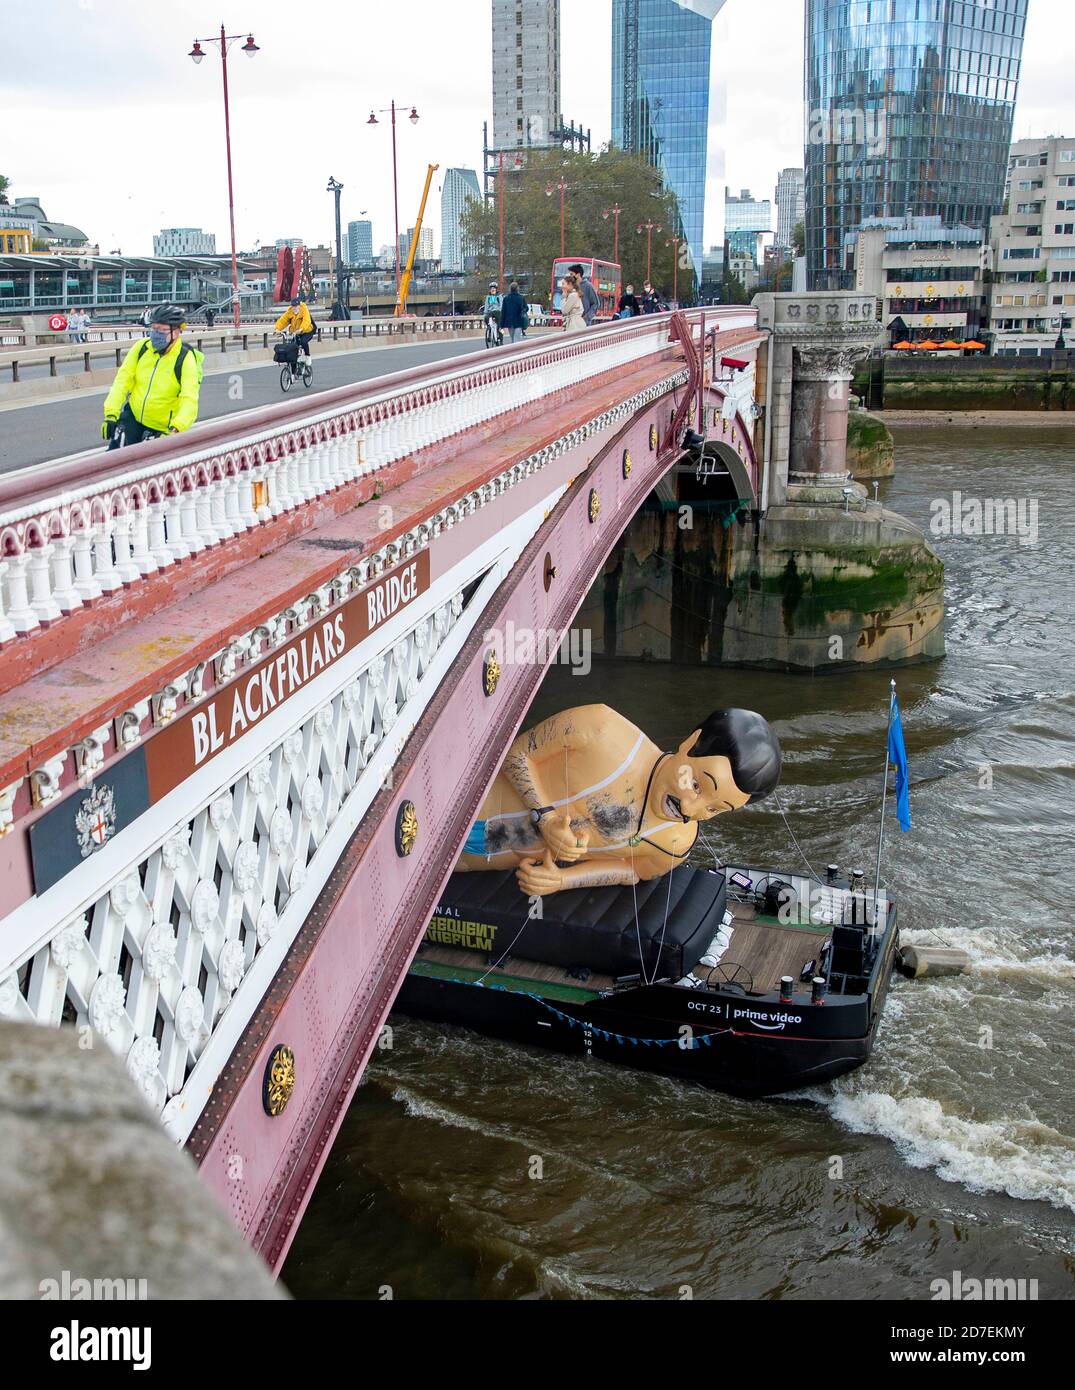 pic shows:  Borat inflatable goes down the Thames in London to promote Borat 2  Masked cyclists cross Blackfriars as the inflatable goes underneath Stock Photo